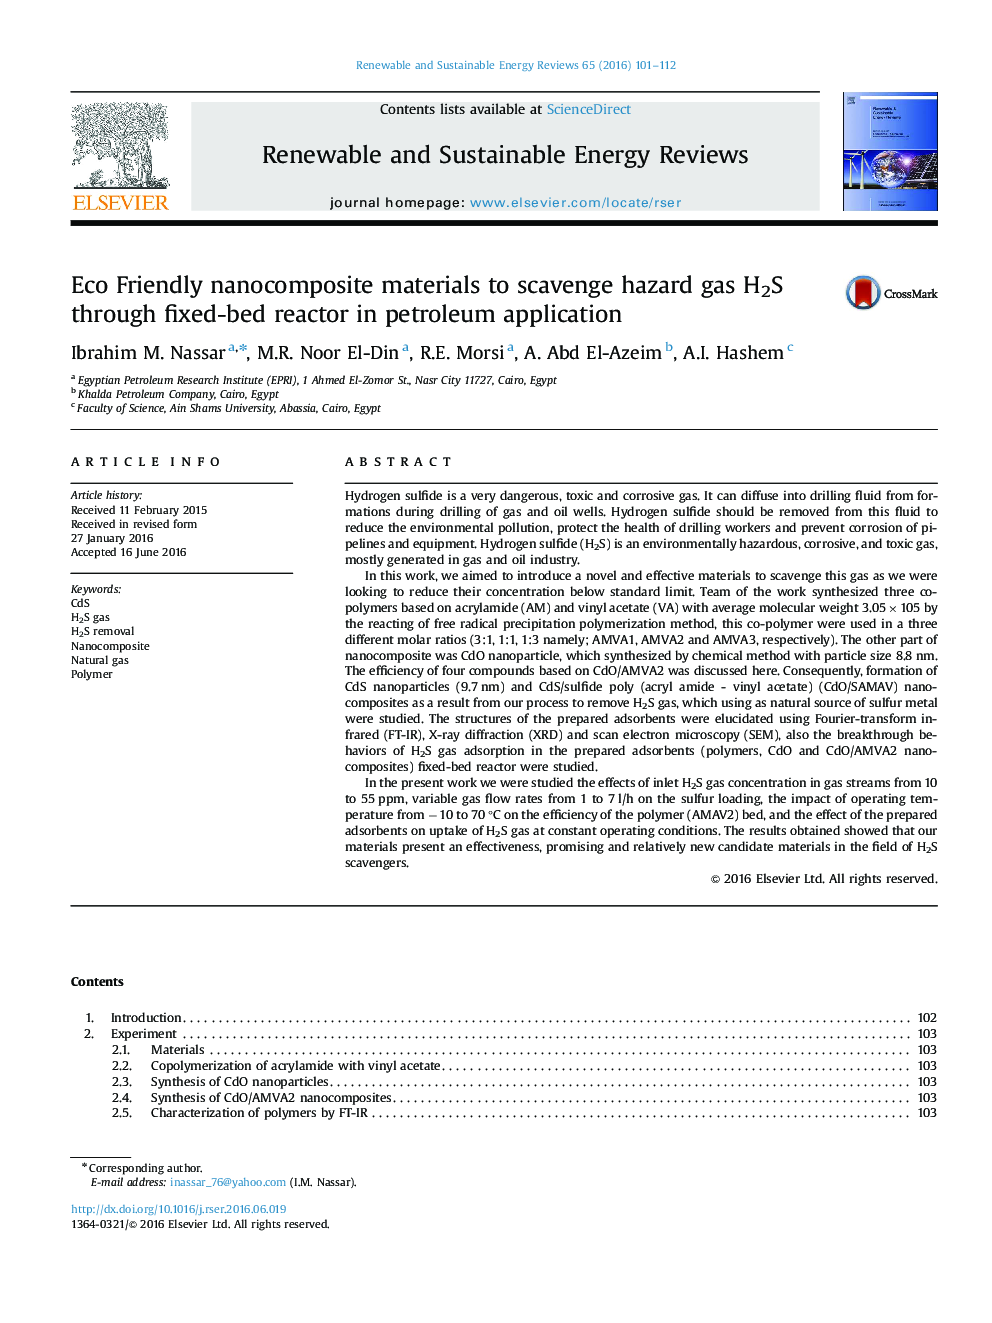 Eco Friendly nanocomposite materials to scavenge hazard gas H2S through fixed-bed reactor in petroleum application